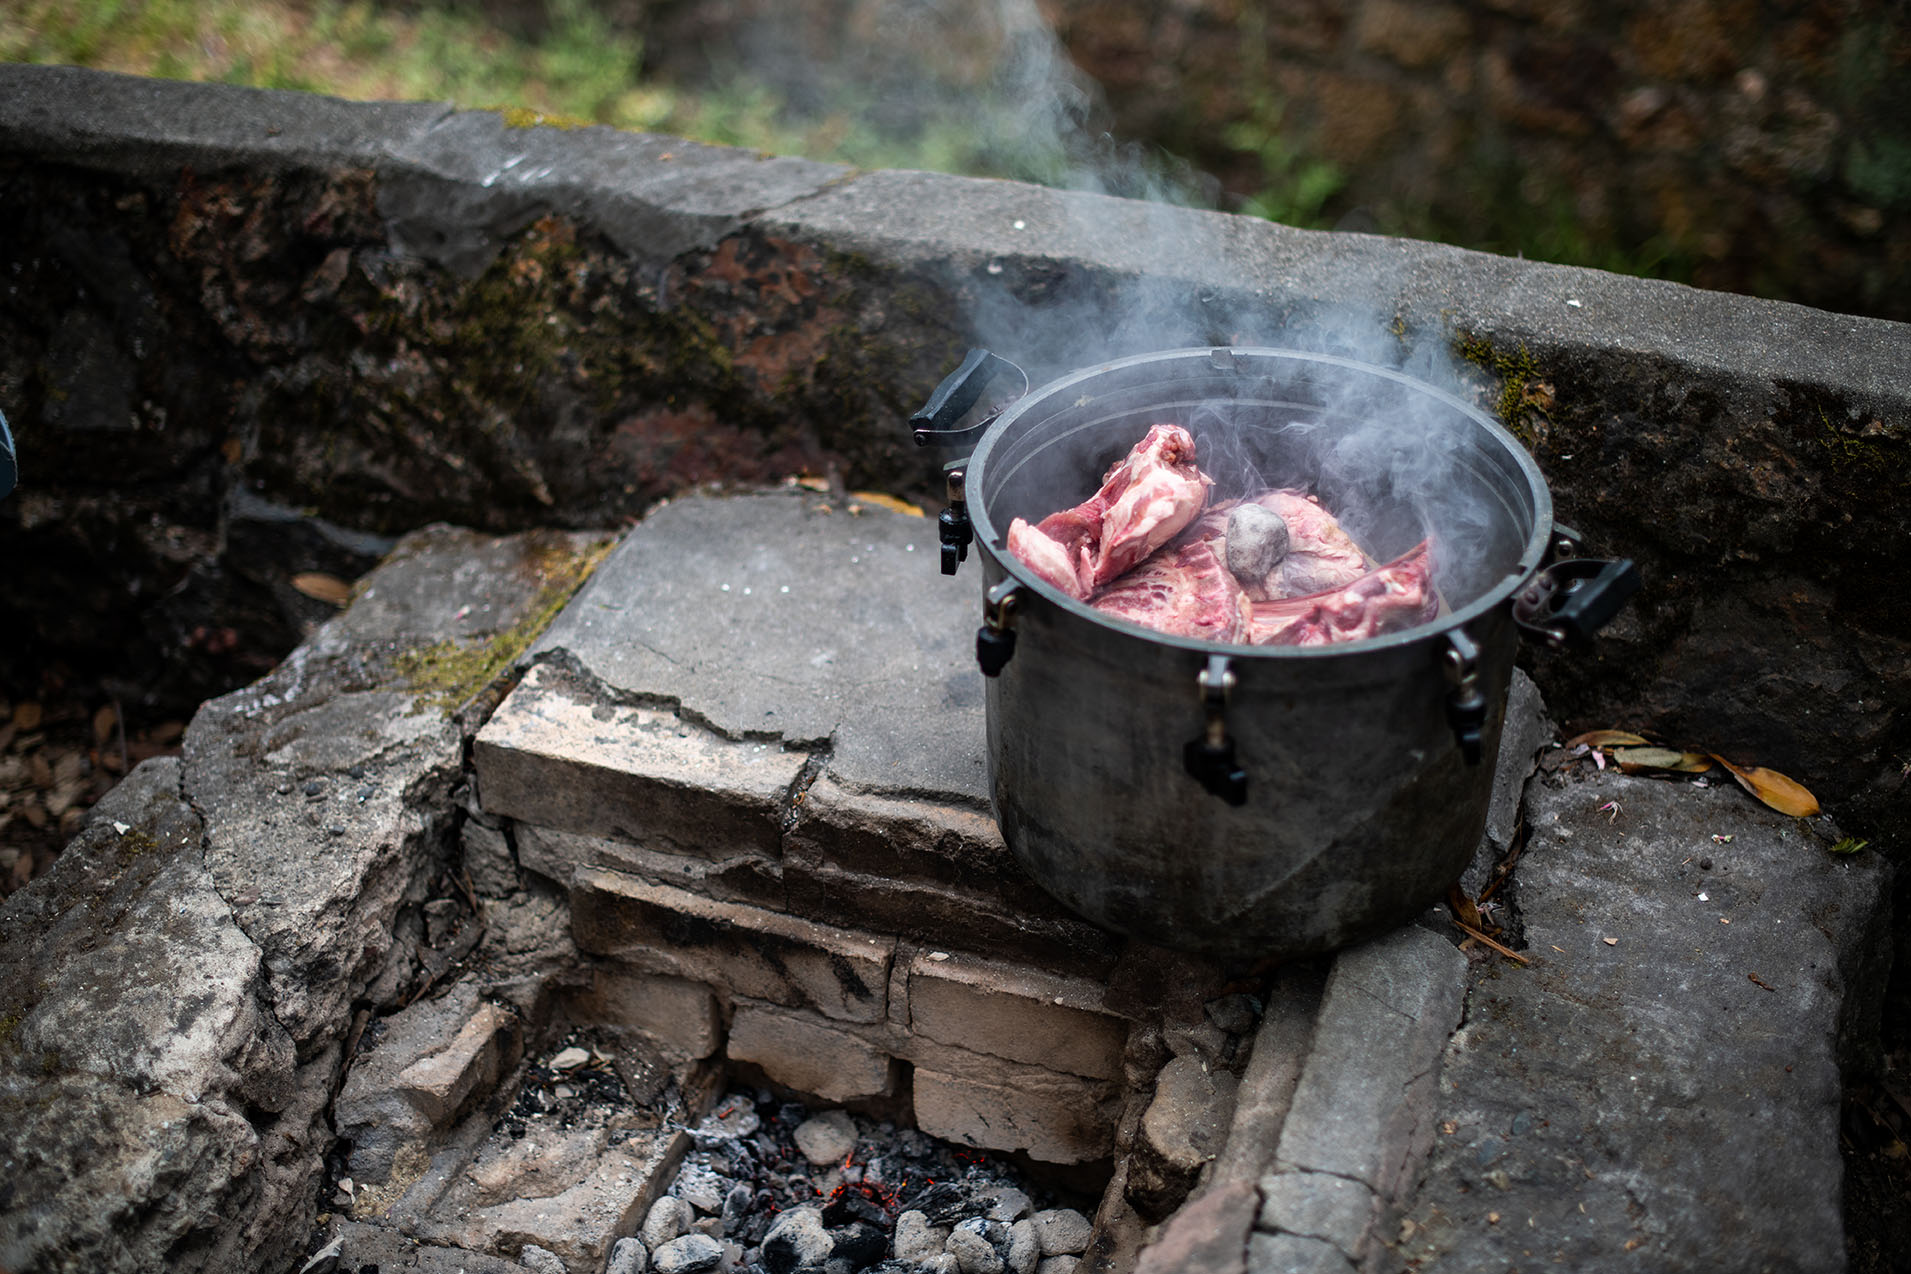 A metal pot filled with chunks of raw meat sits on an outdoor grill area with wisps of smoke rising up.